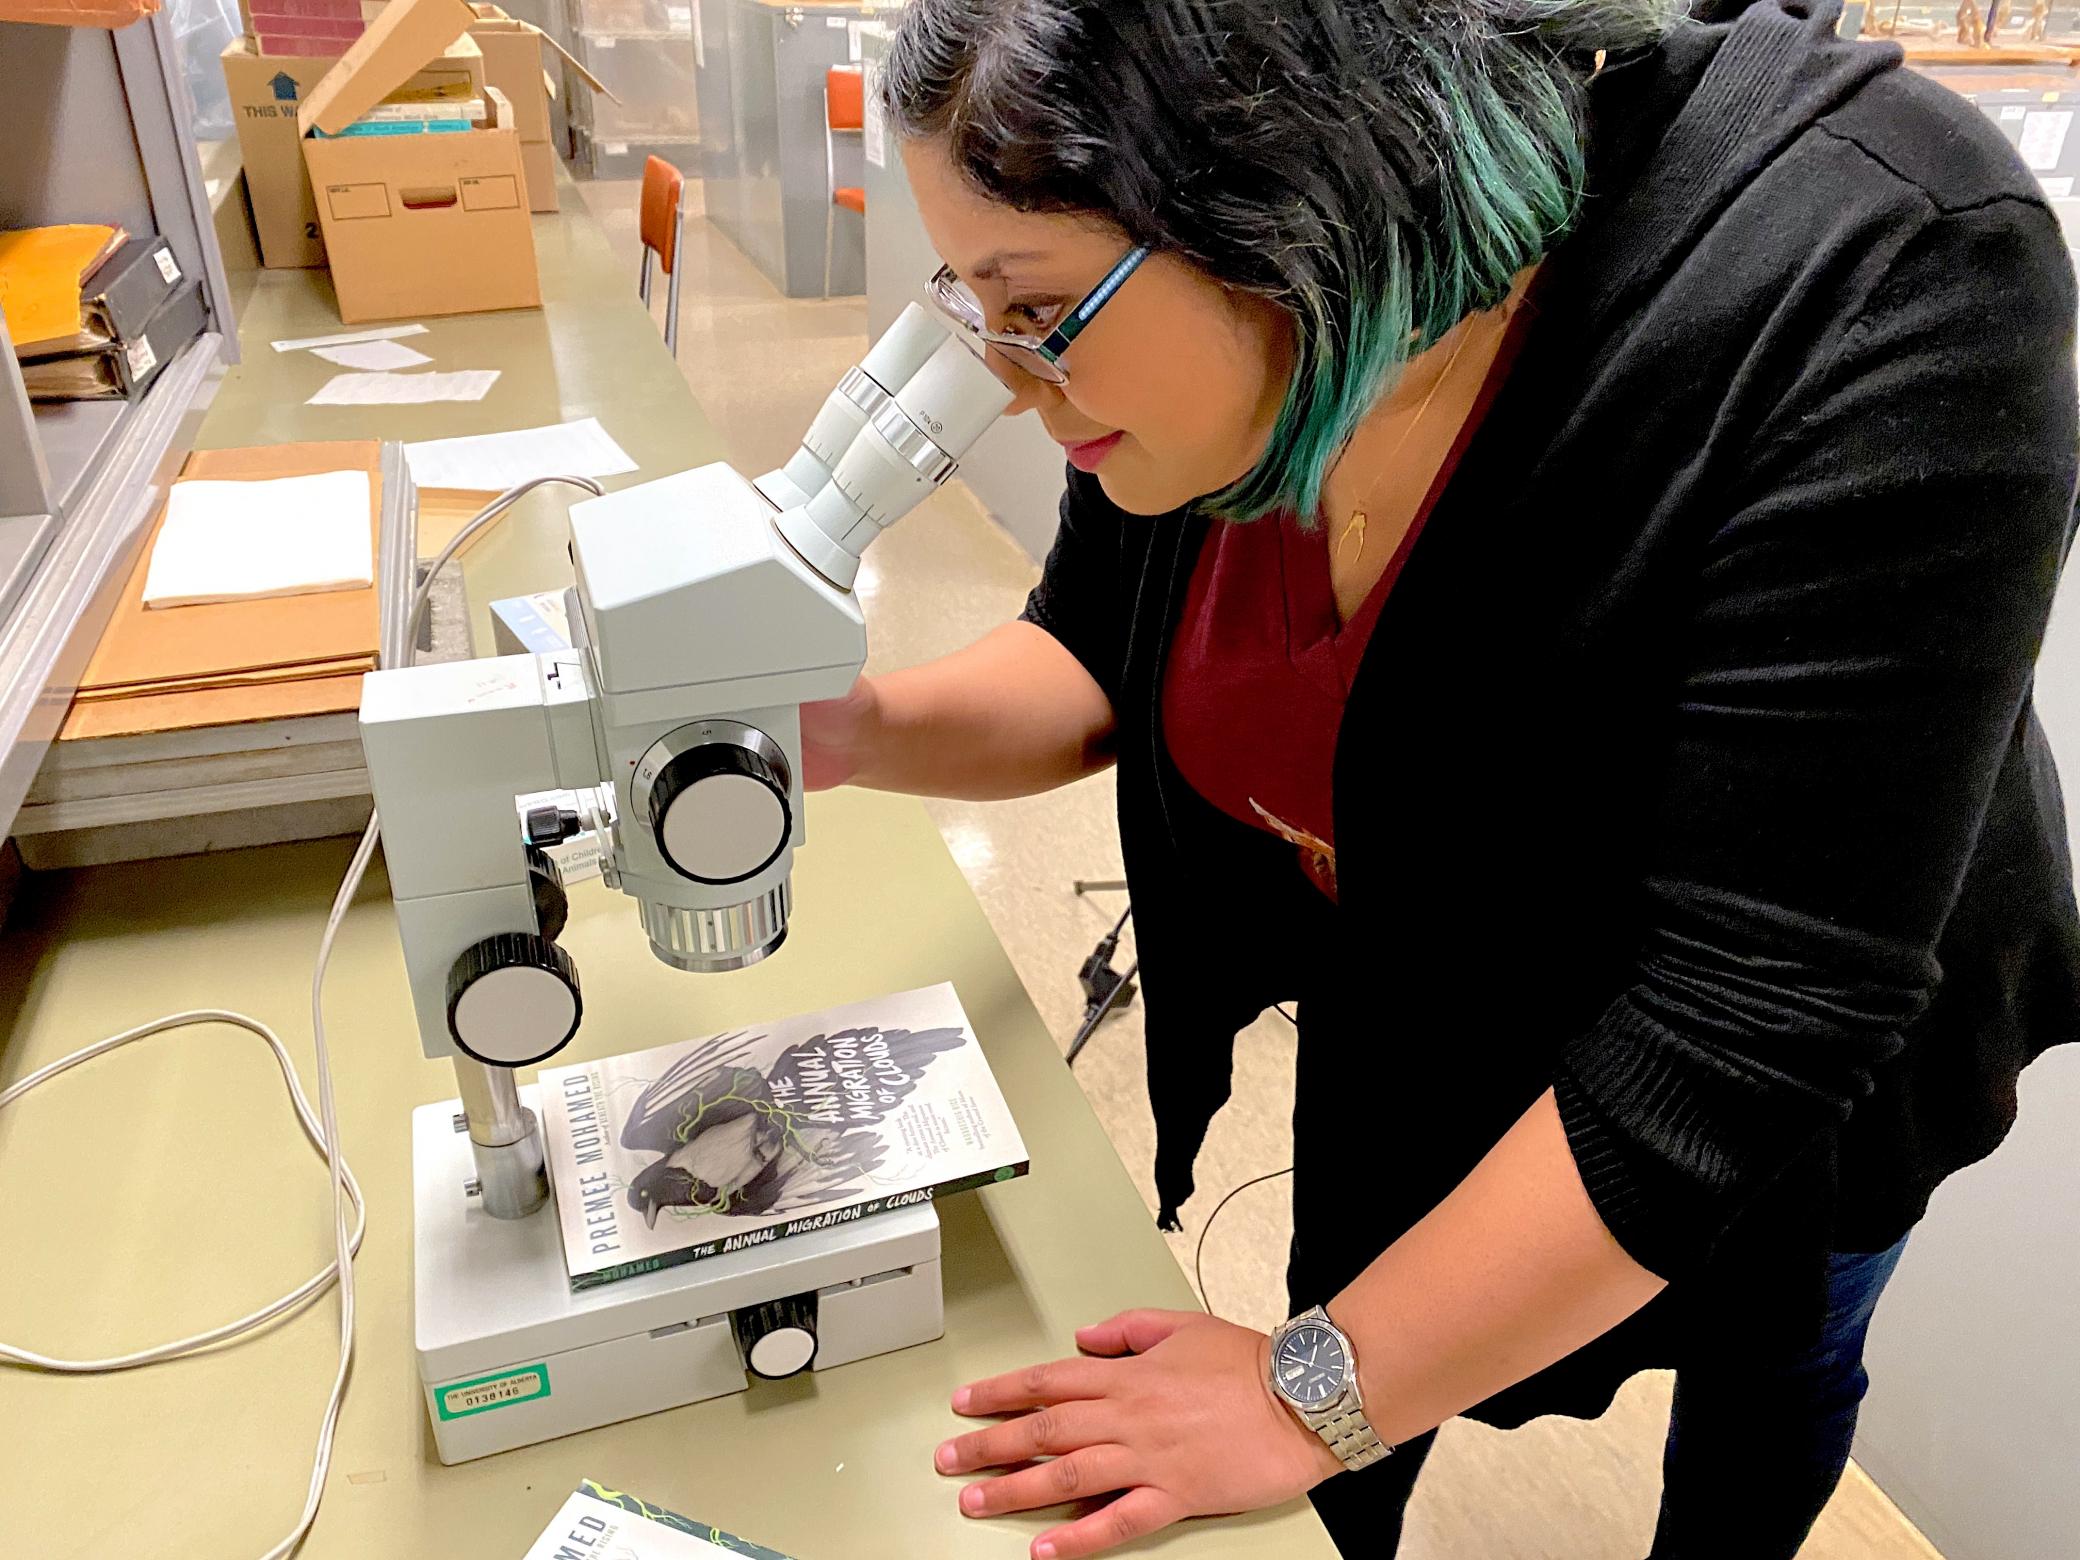 Author and scientist Premee Mohamed looks into a microscope in a lab.